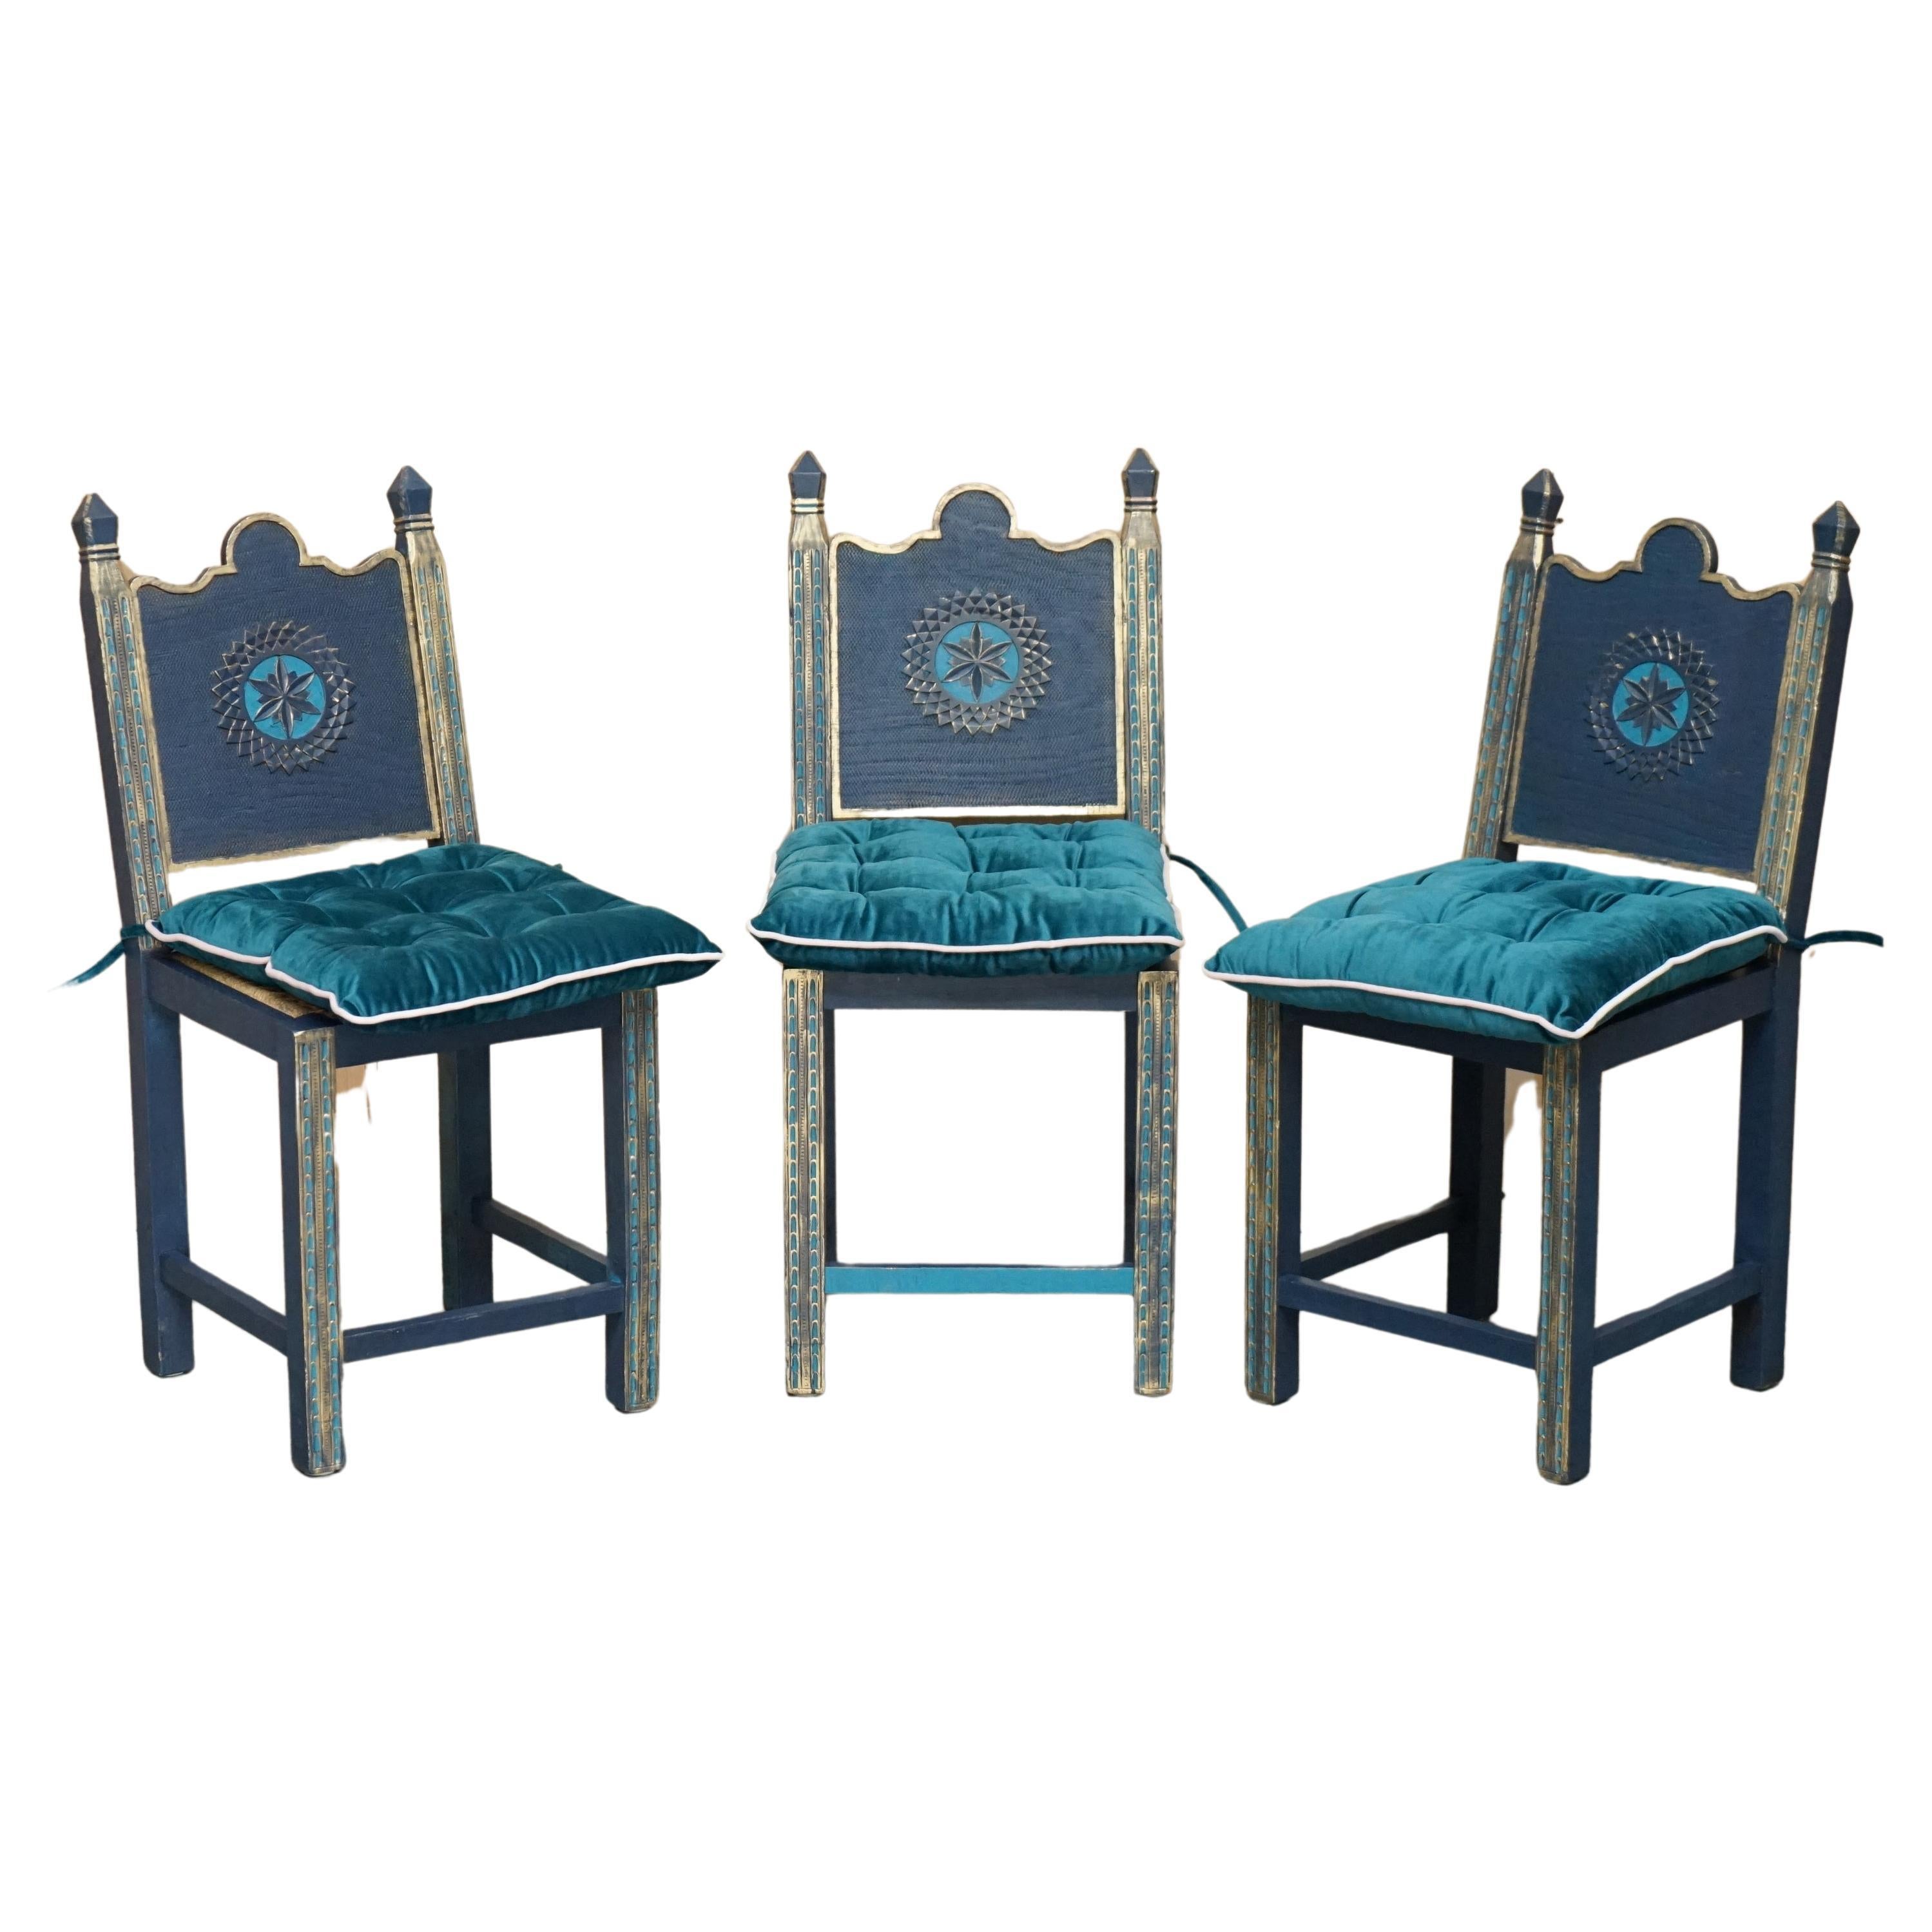 SUITE OF THREE HIGH SEAT HAND PAINTED SiDE CHAIRS IN THE GOTHIC REVIVAL TASTE For Sale